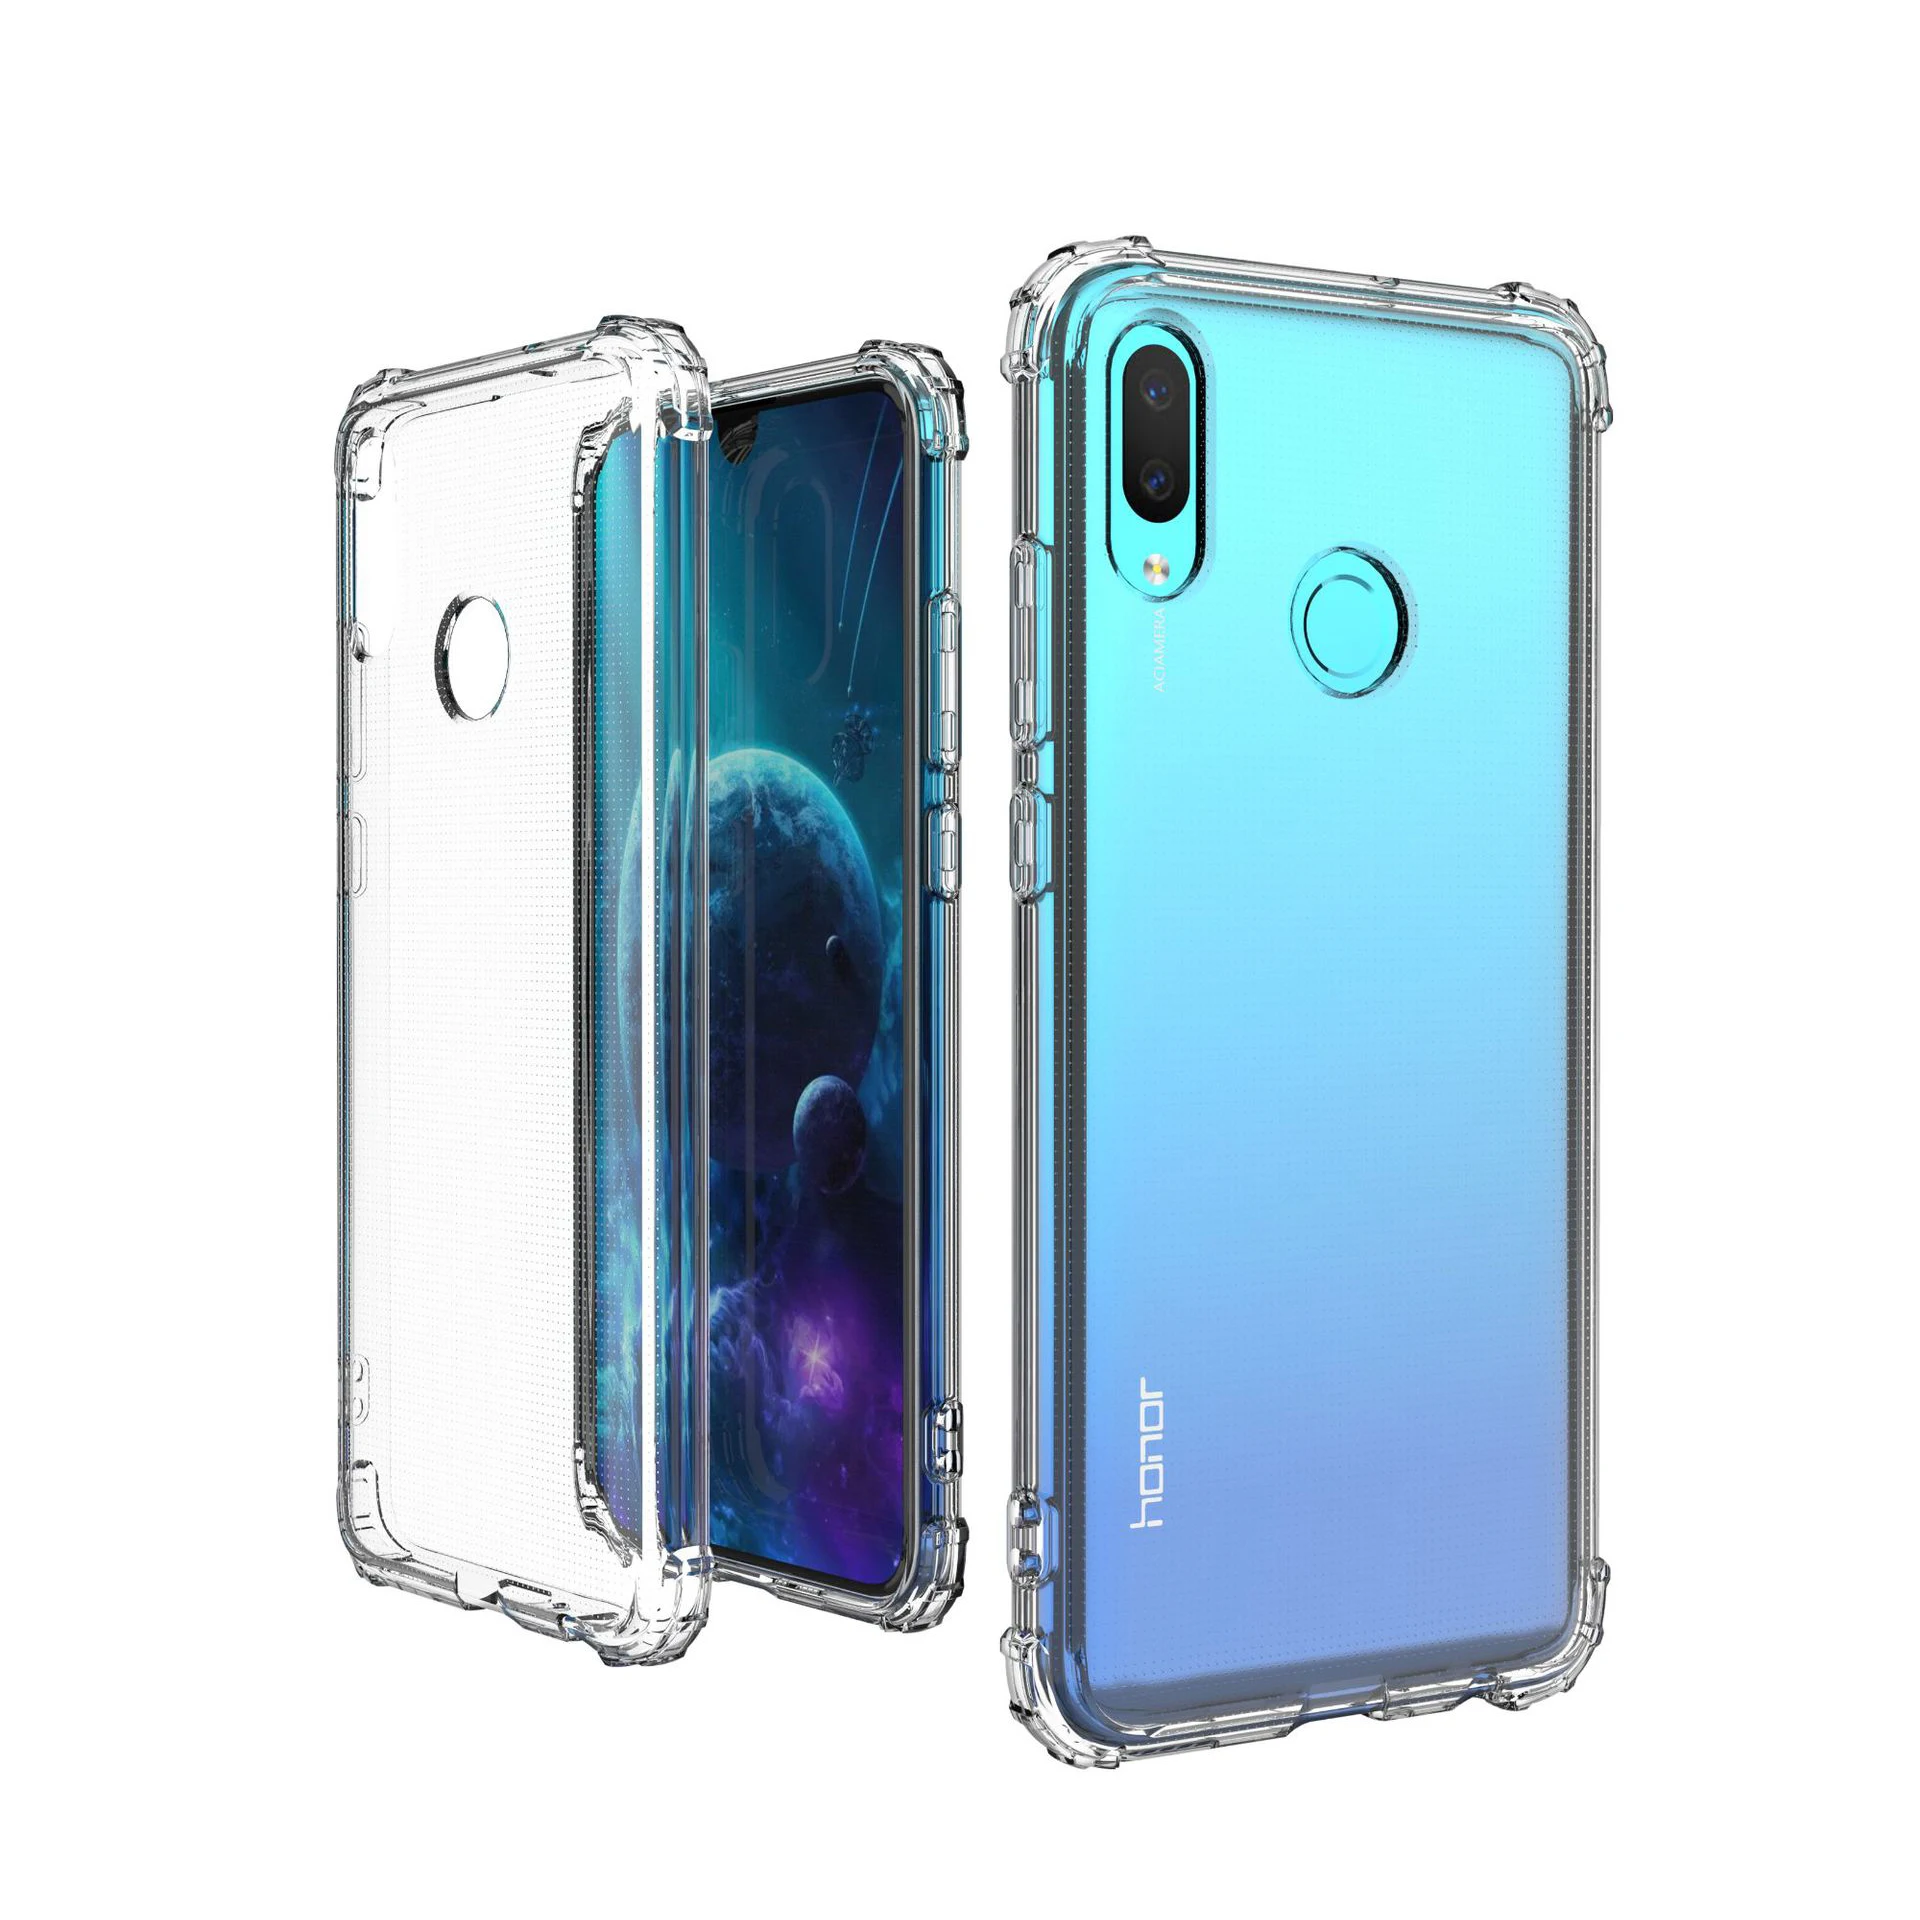 Golpe fuerte Algún día Aprovechar Source Low Price Case For Huawei P Smart 2019 Shock Absorption Soft TPU  Protective Shell Cell Phone Accessories Case on m.alibaba.com